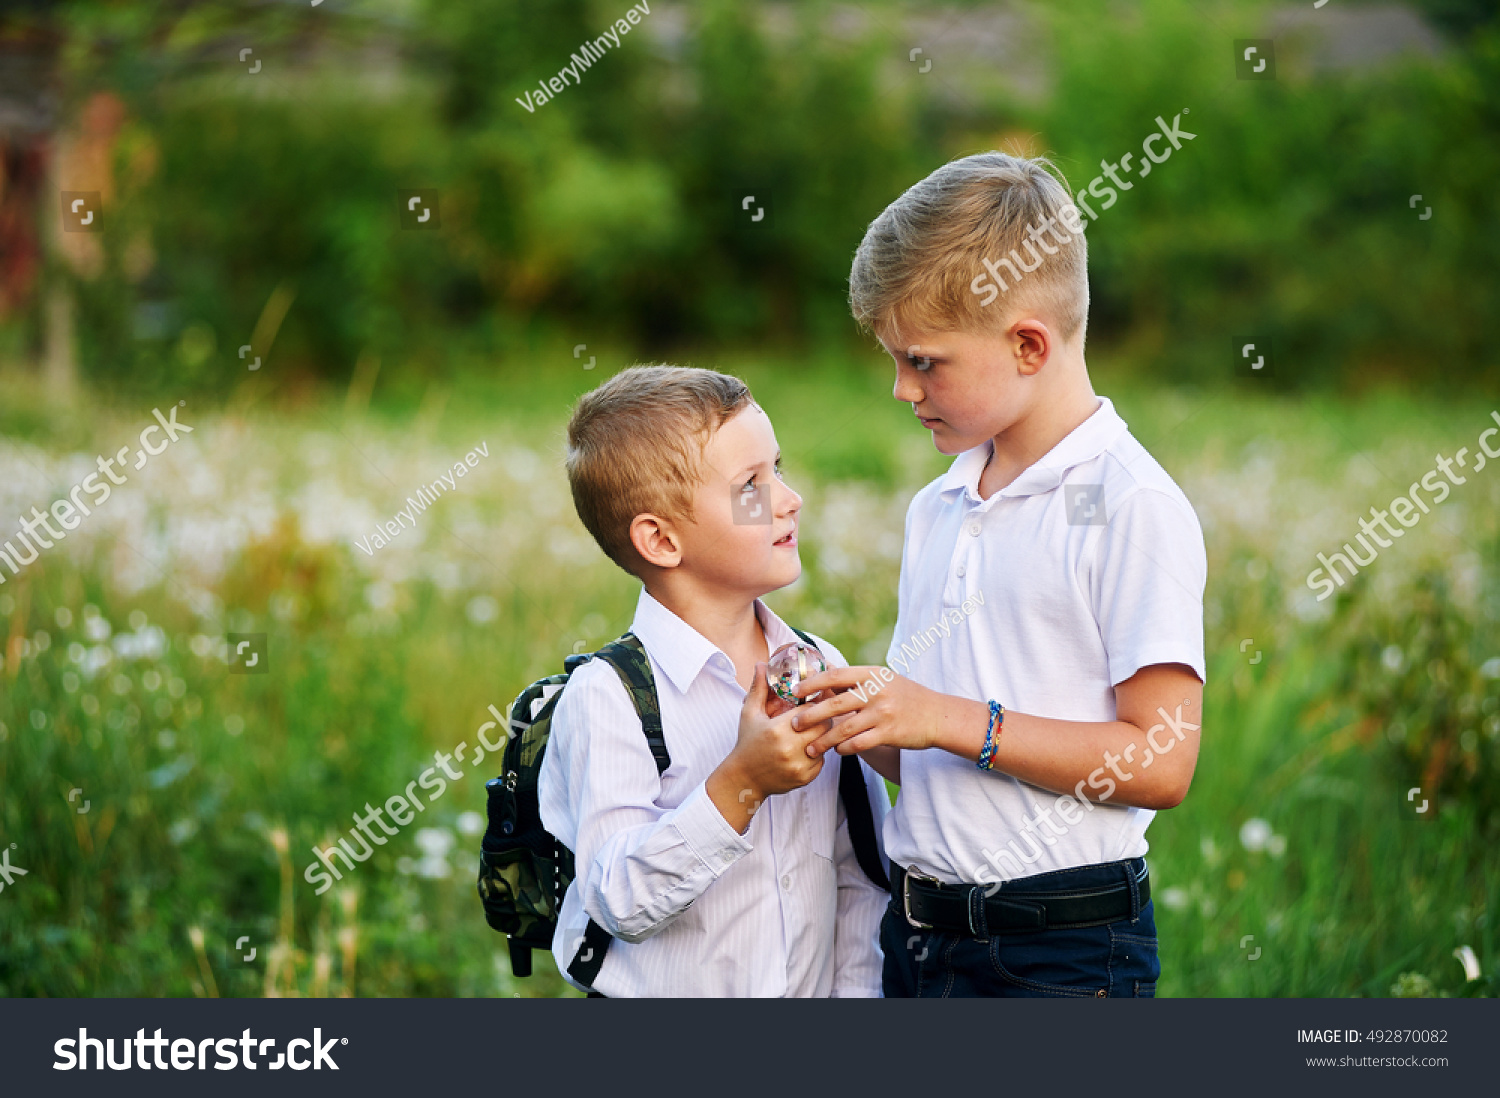 Two Boys Talking Together Play Stock Photo 492870082 - Shutterstock